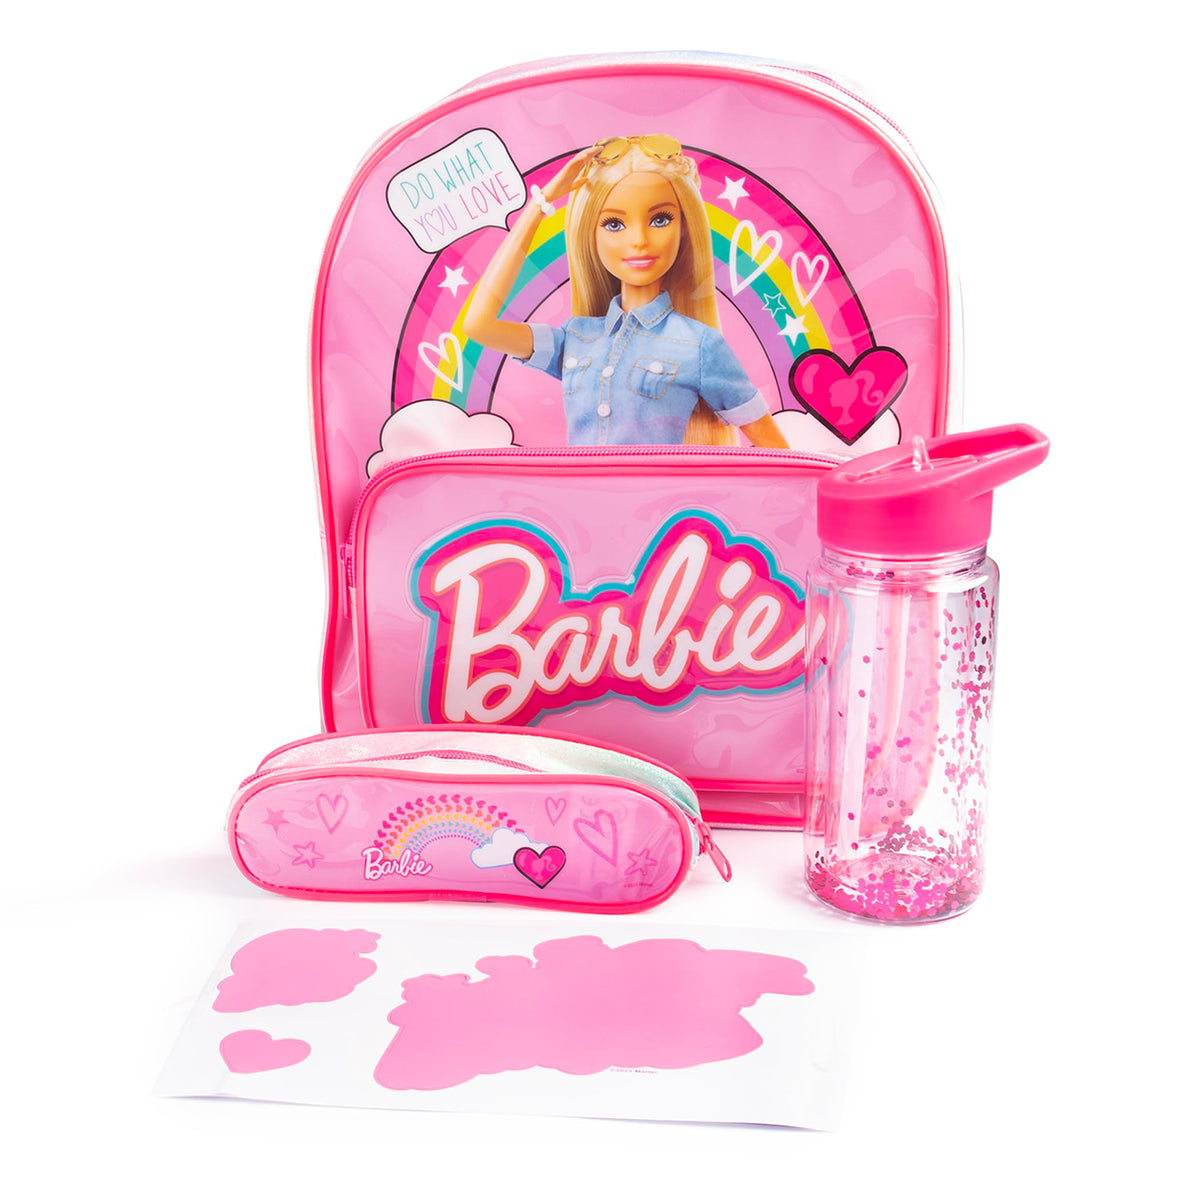 Barbie School Backpack - Includes 1 x Backpack, 1 x Pencil Case and 1 x Scratch and Reveal Water Bottle with Straw - Back to School Supplies Reveal Accessories - School Bag